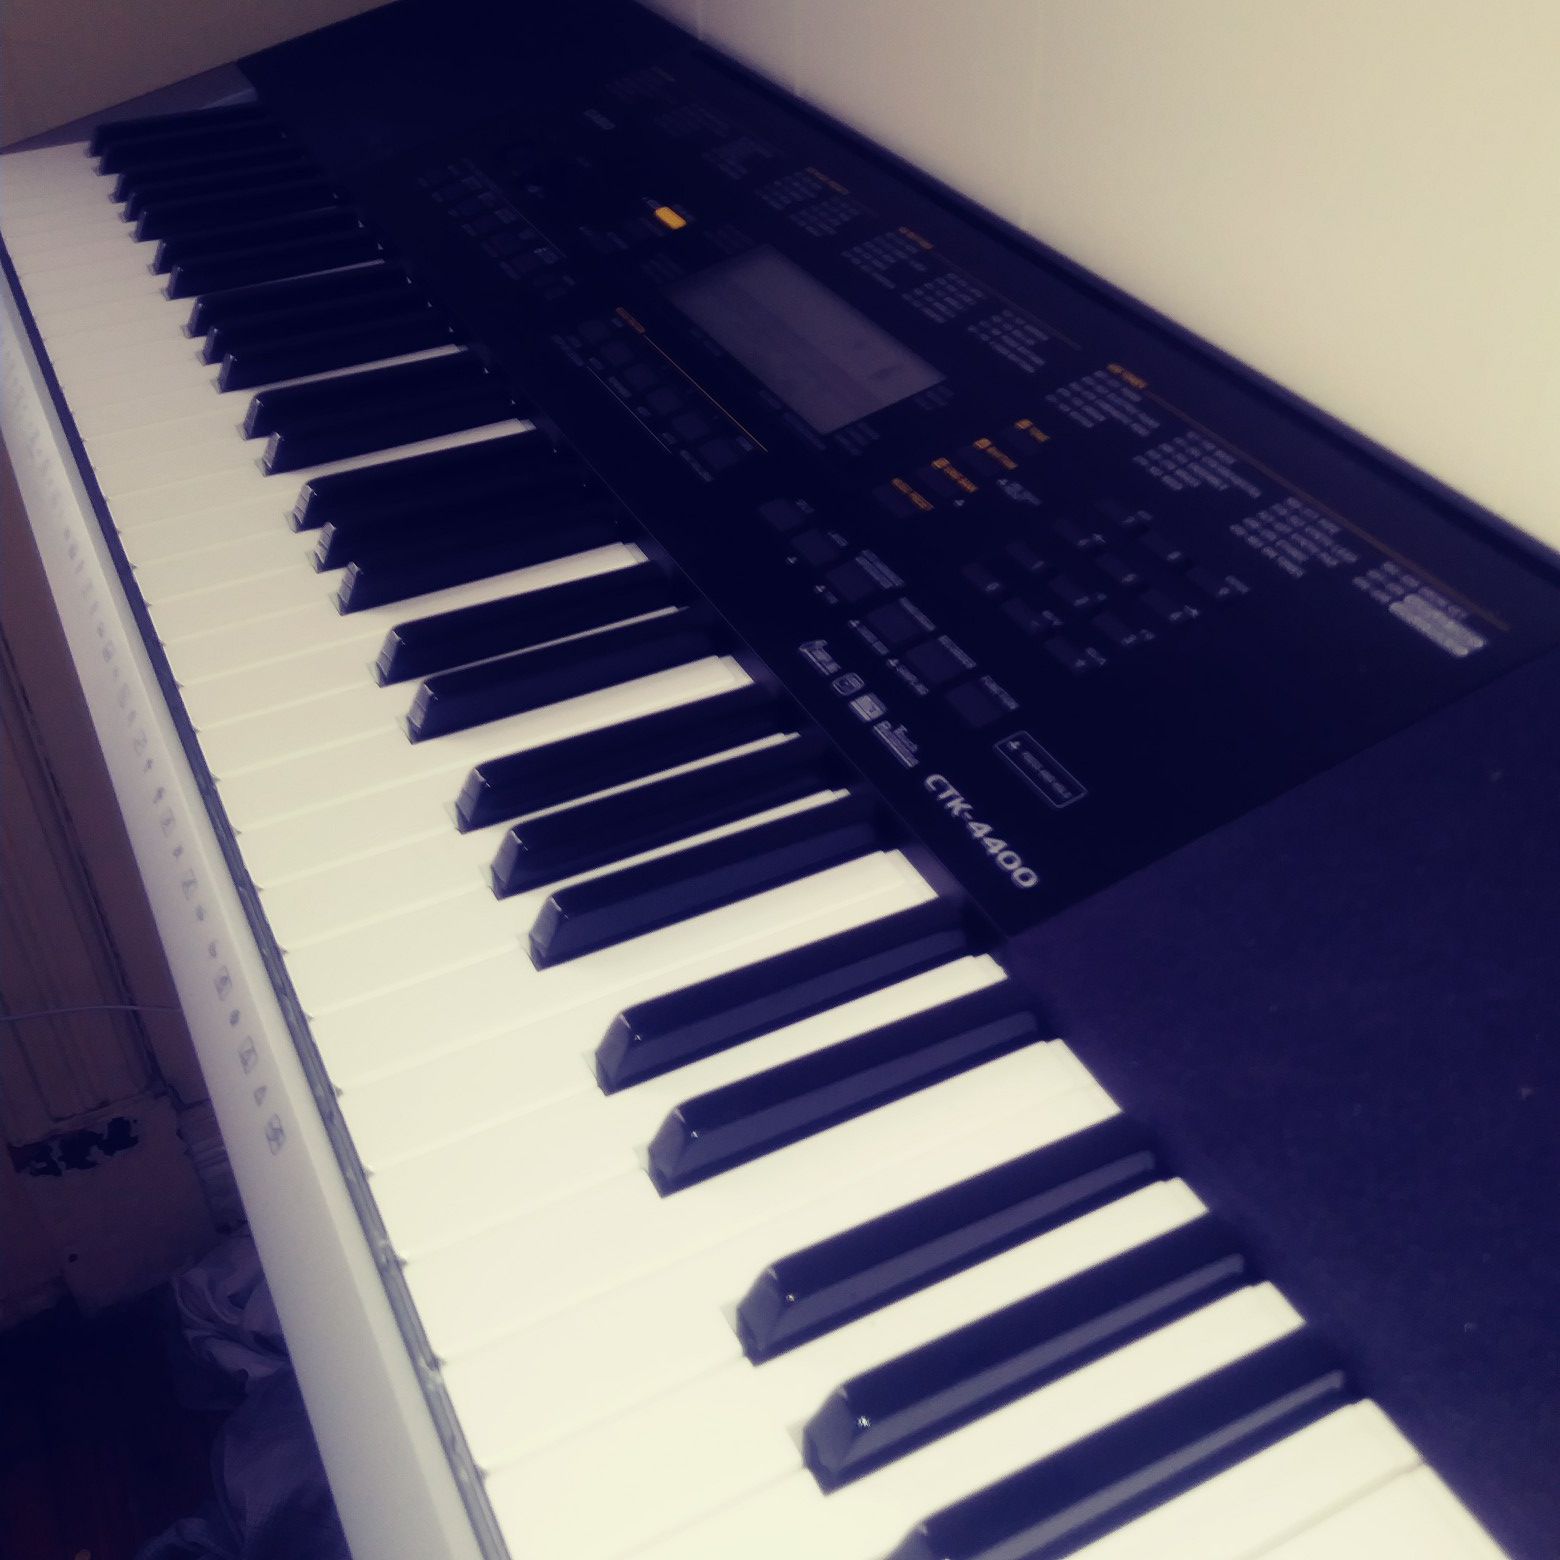 Great Casio Keyboard 🎶. Great for Producers and Beginners!